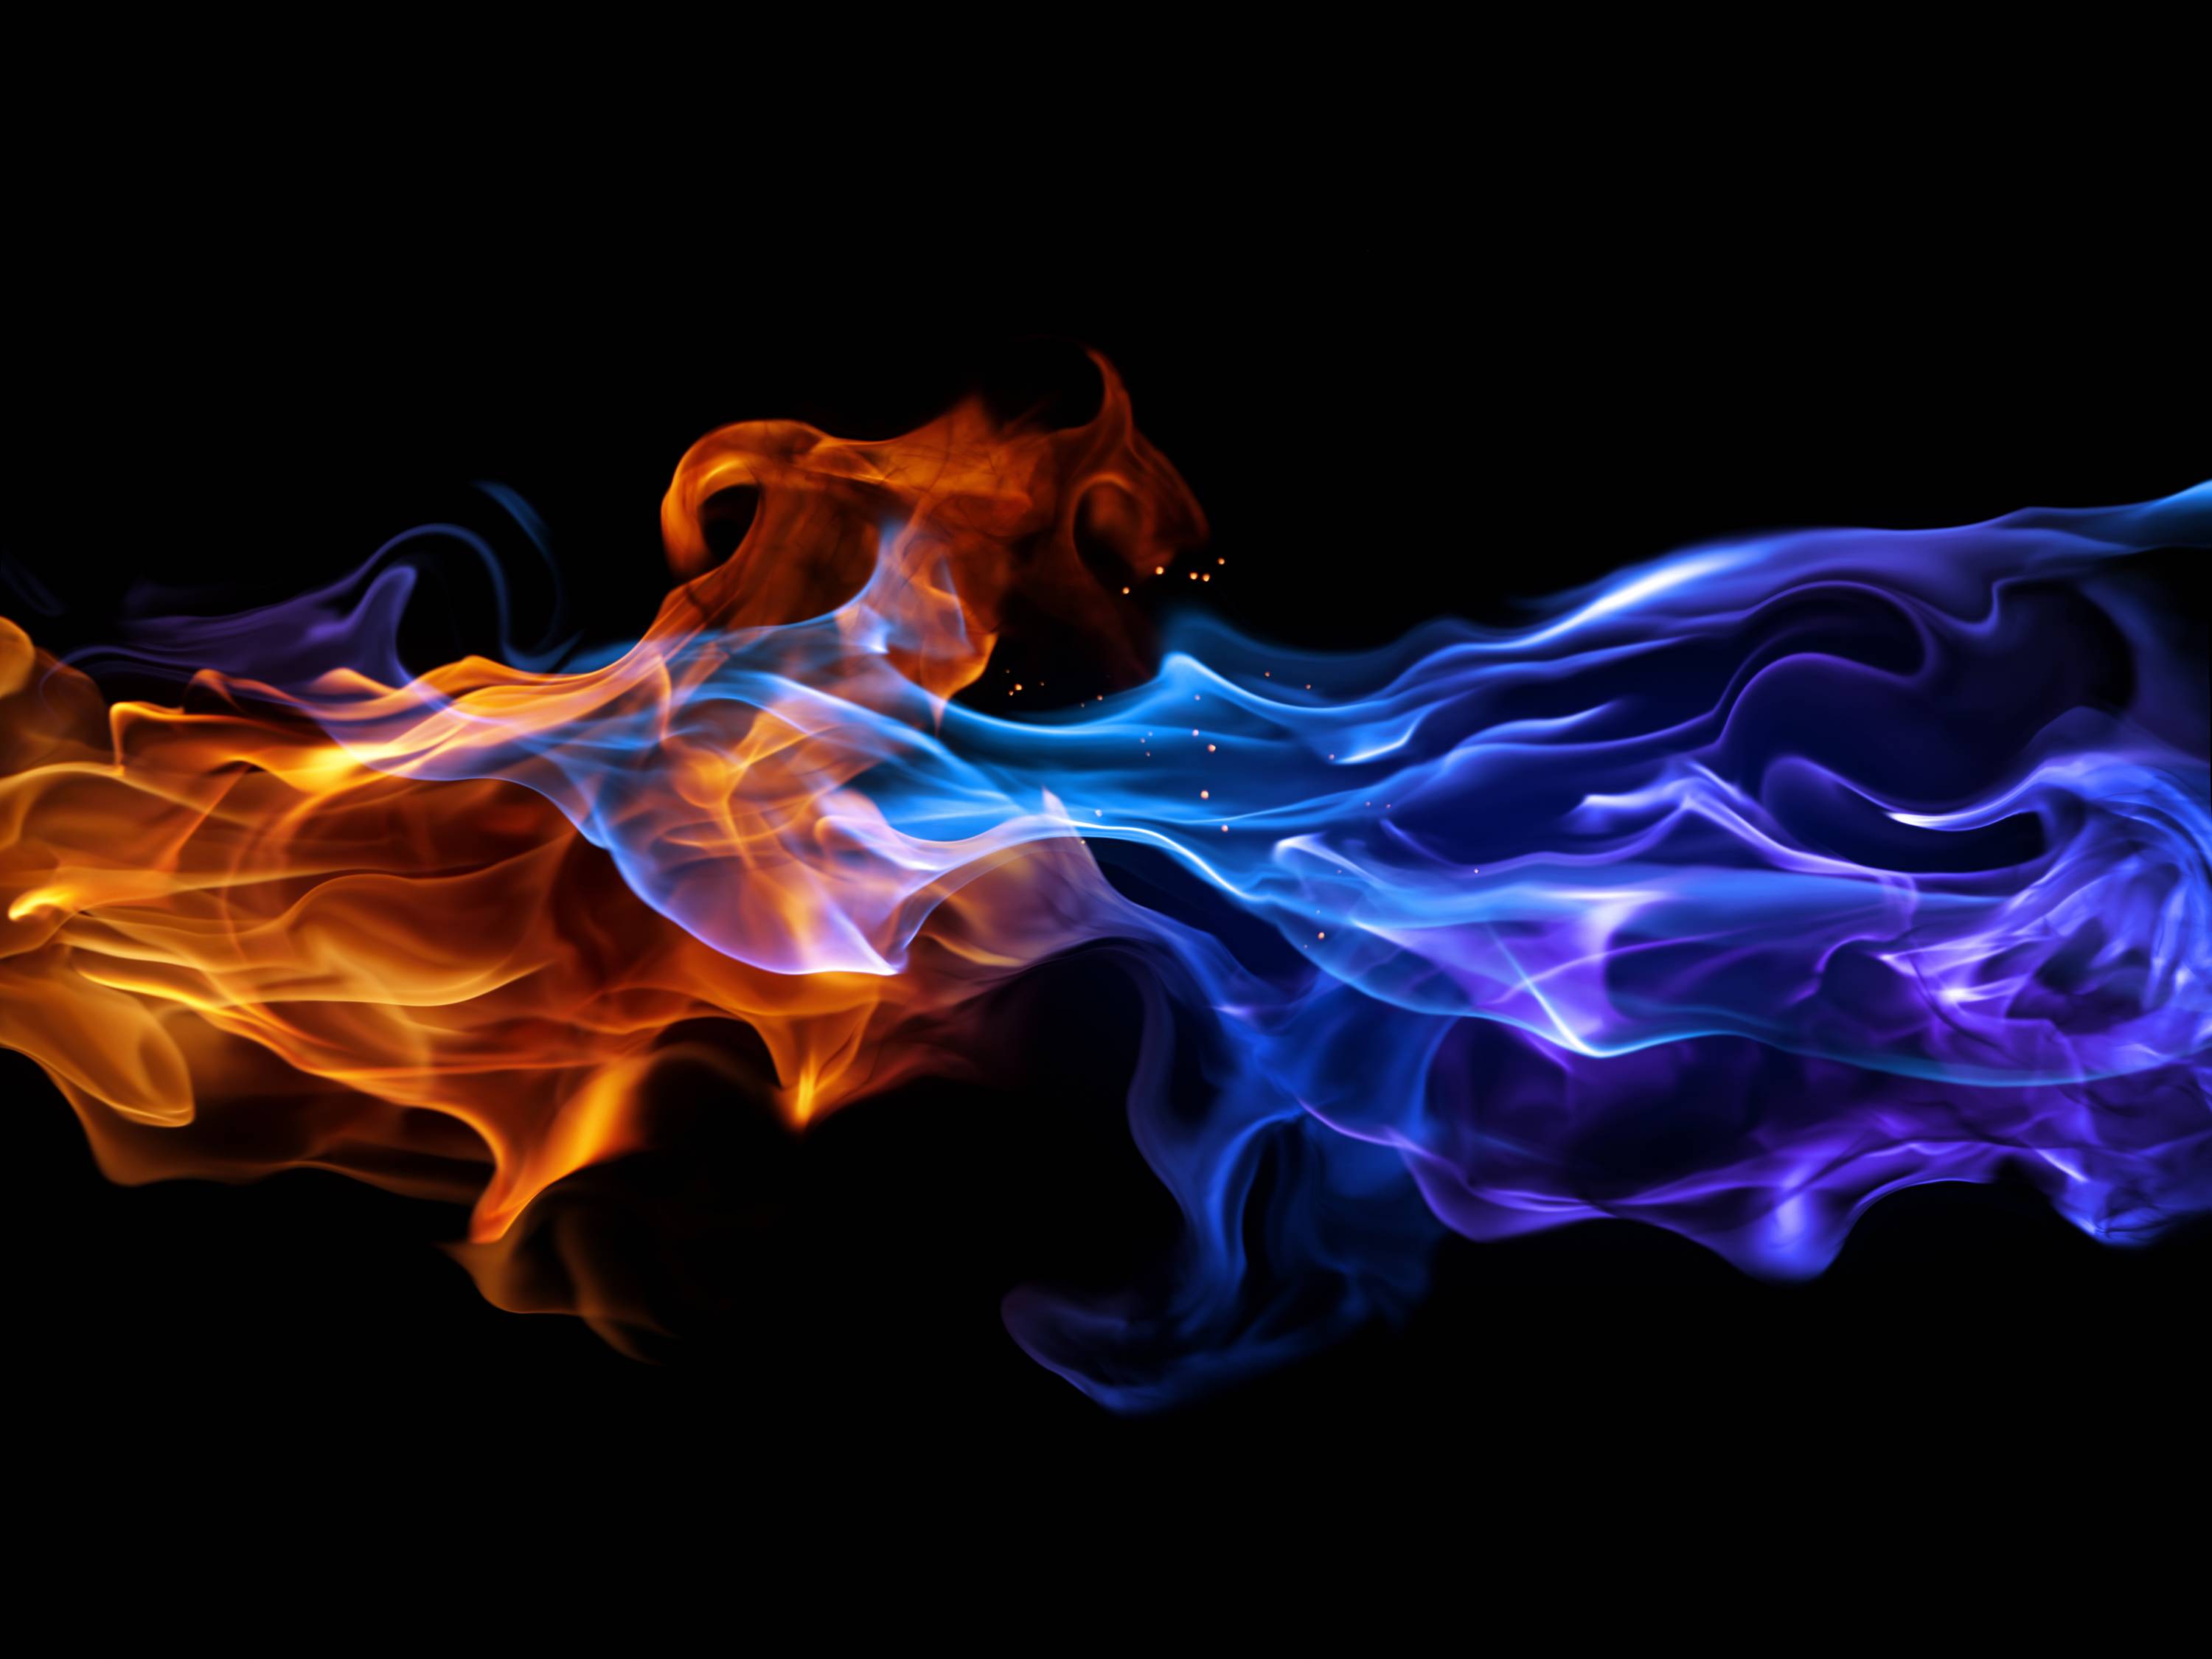 Abstract Fire Wallpaper Hd Download Desktop - Red And Blue Flames -  3000x2250 Wallpaper 